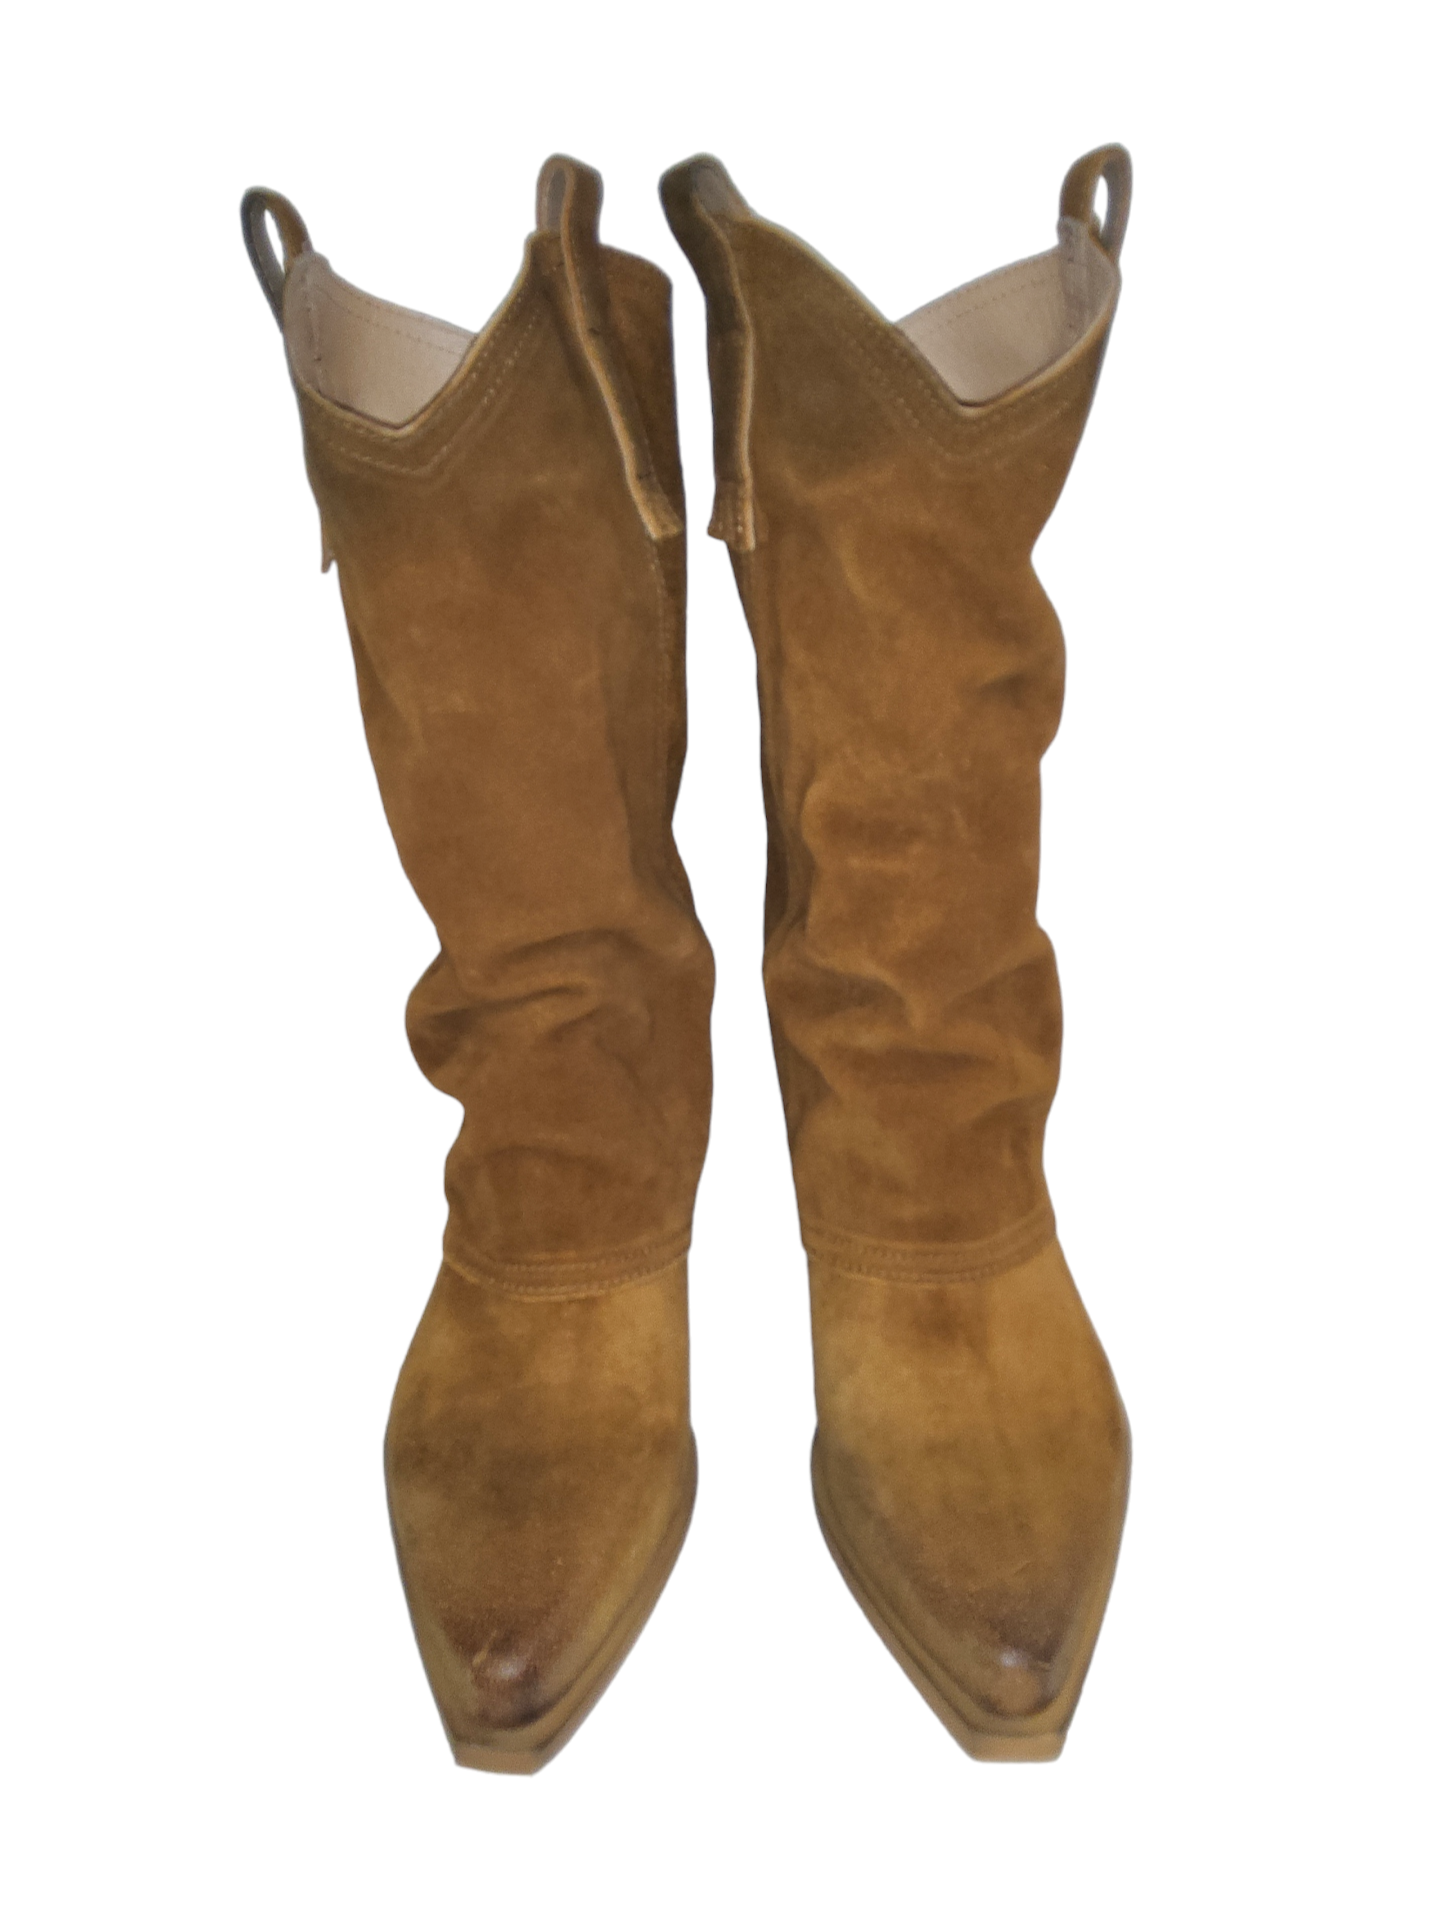 Western style boot